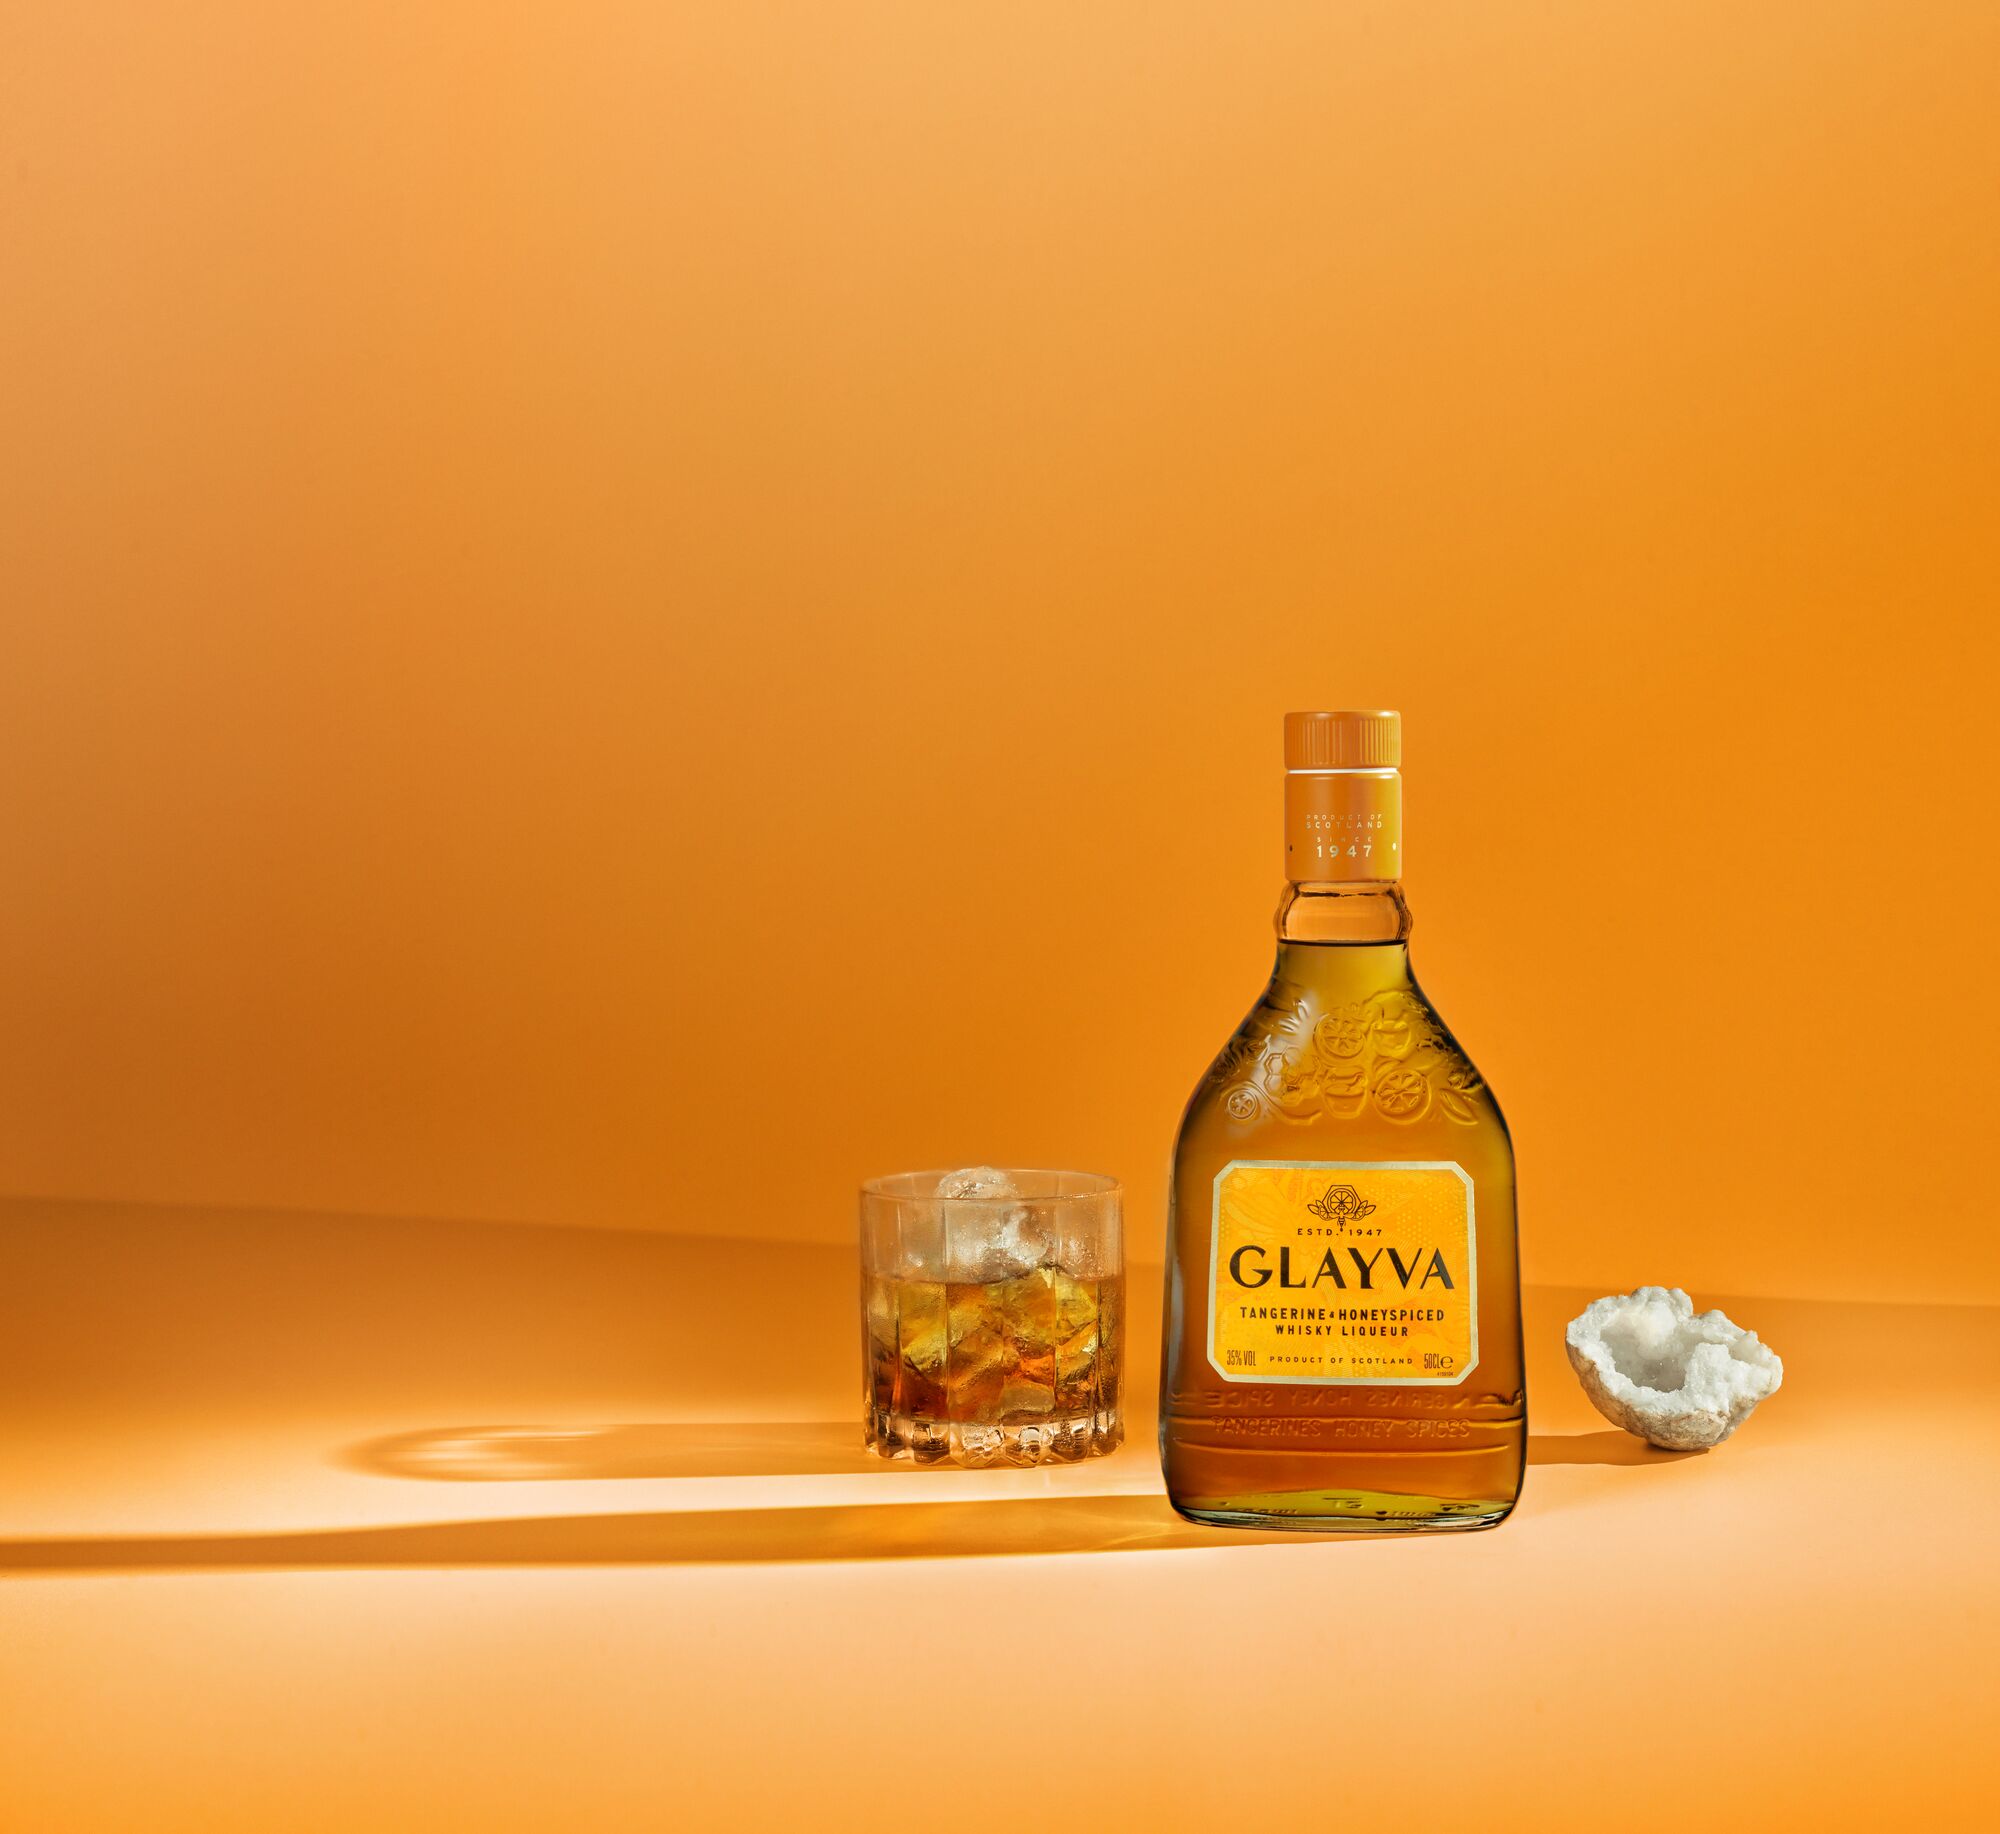 Glayva launches ‘Not Your Usual’ campaign, new design